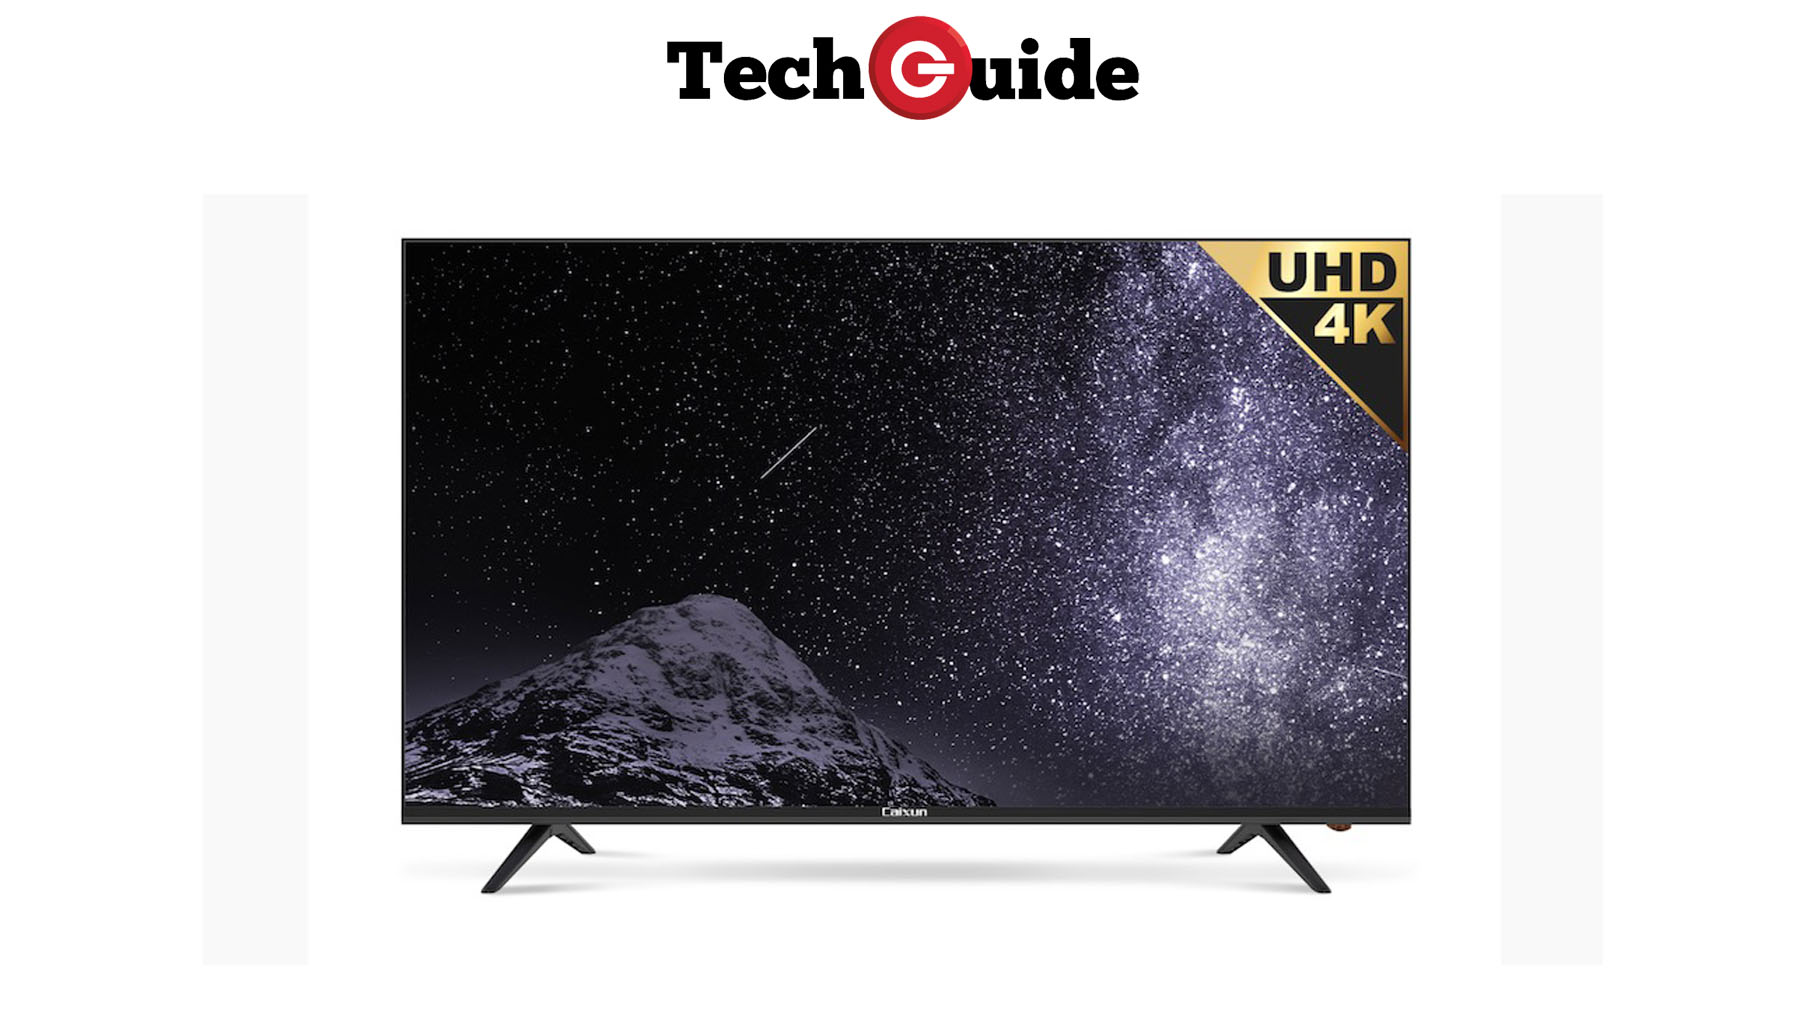 Caixun 55-inch Series S Android TV review – value and easy connectivity